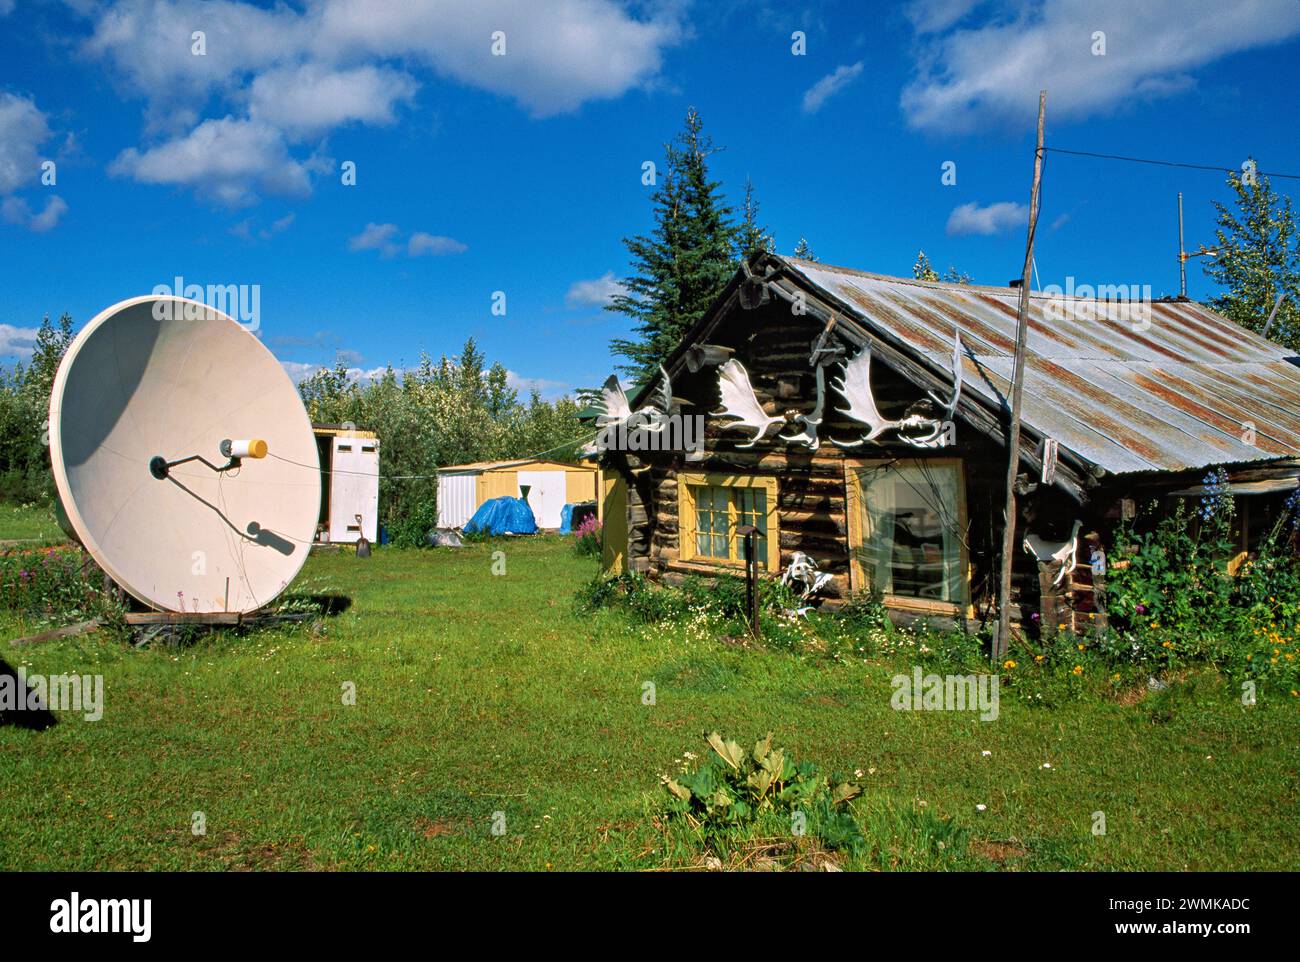 Residents of a historic, rustic log cabin hooked up to the modern amenity of receiving satellite television. Moose antlers adorn the walls of the c... Stock Photo